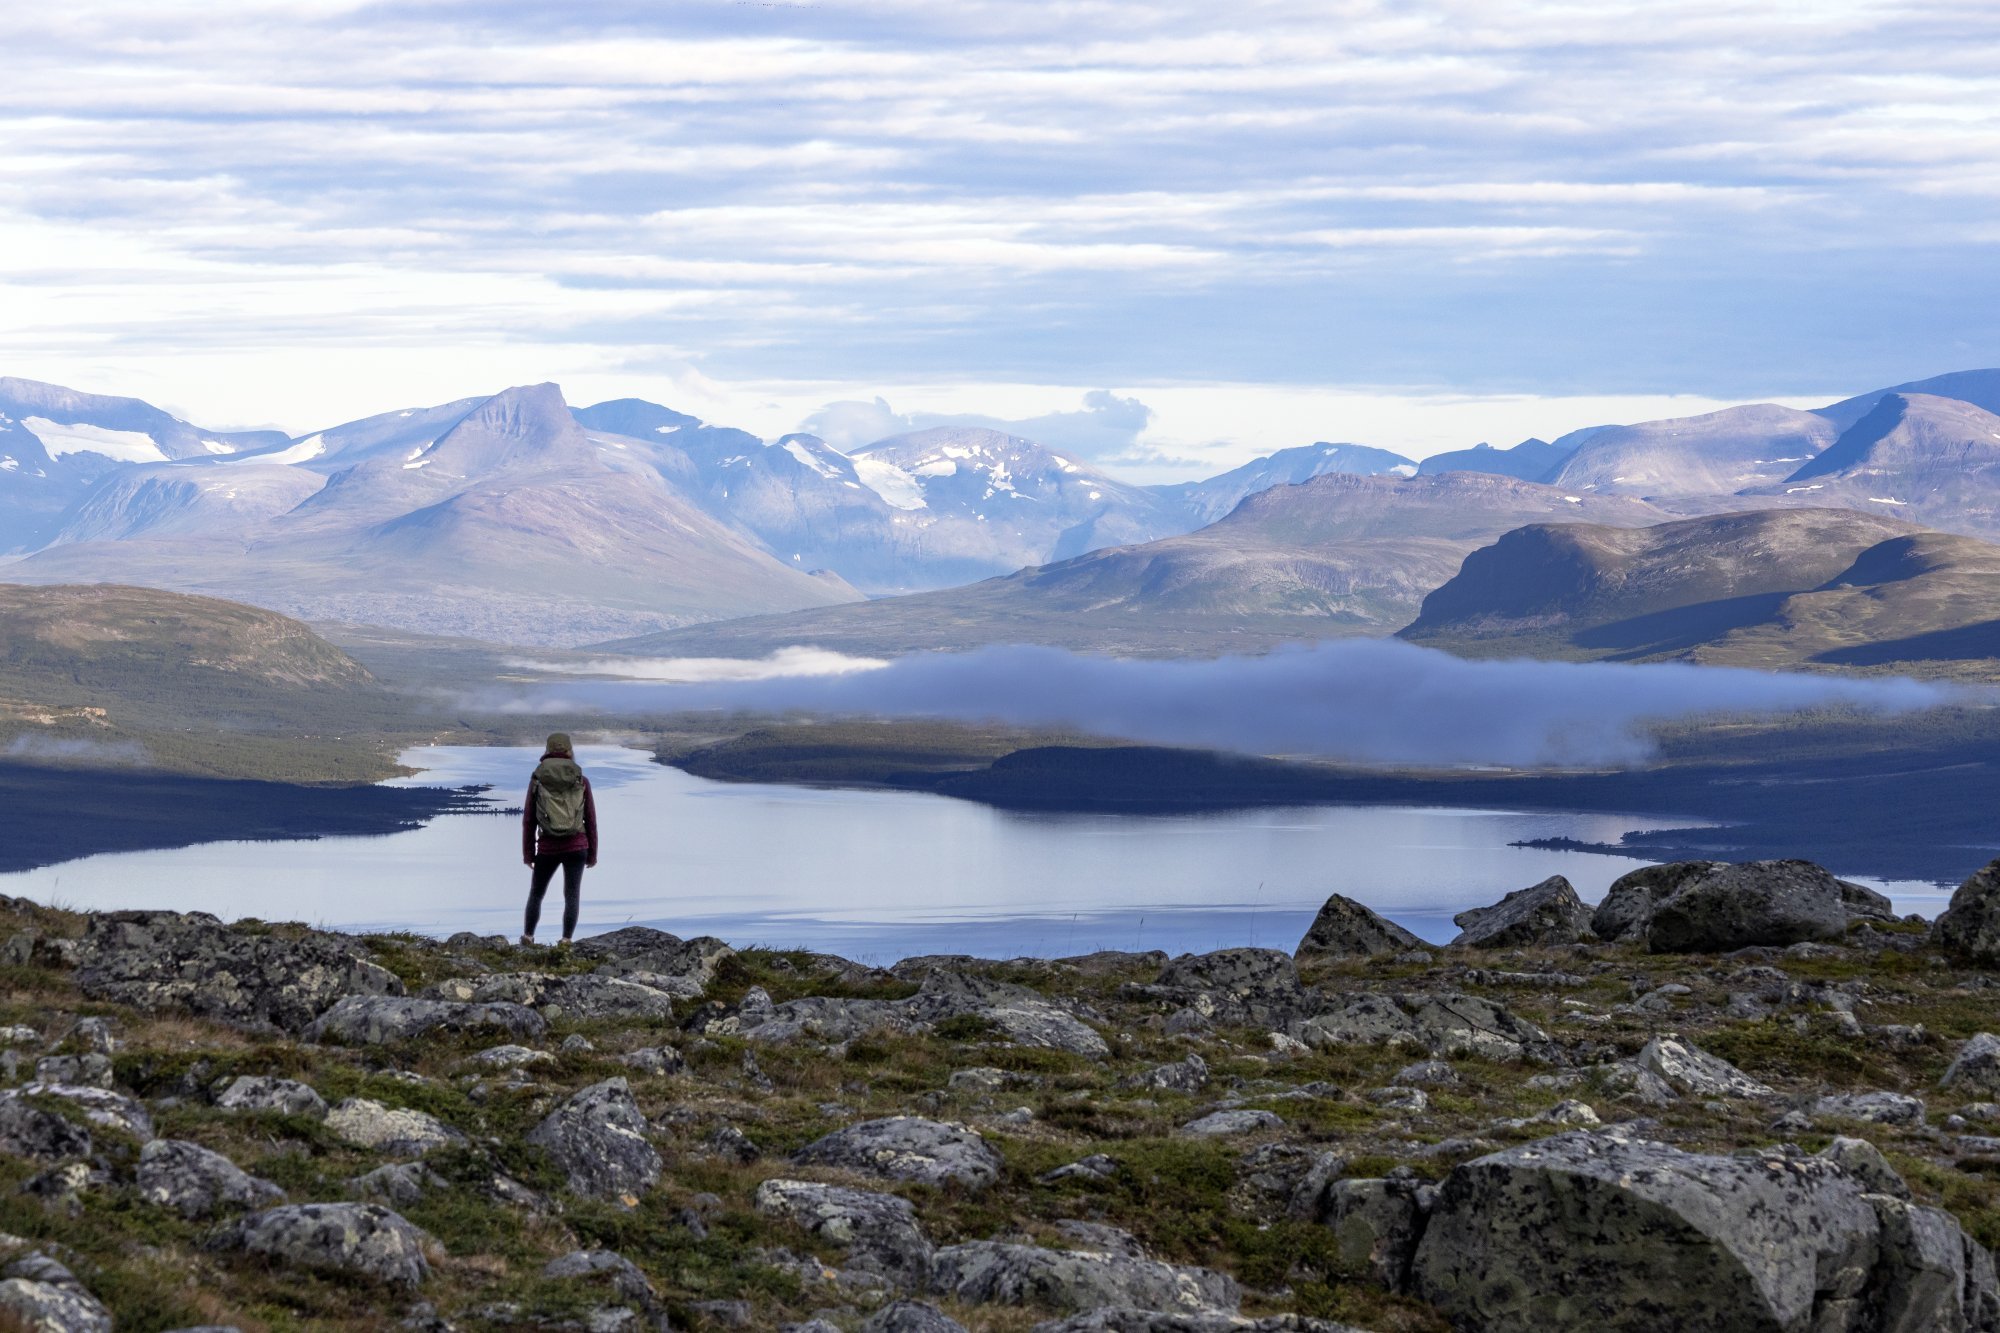 A woman is standing on a fell with lake and mountain landscape infront of her.